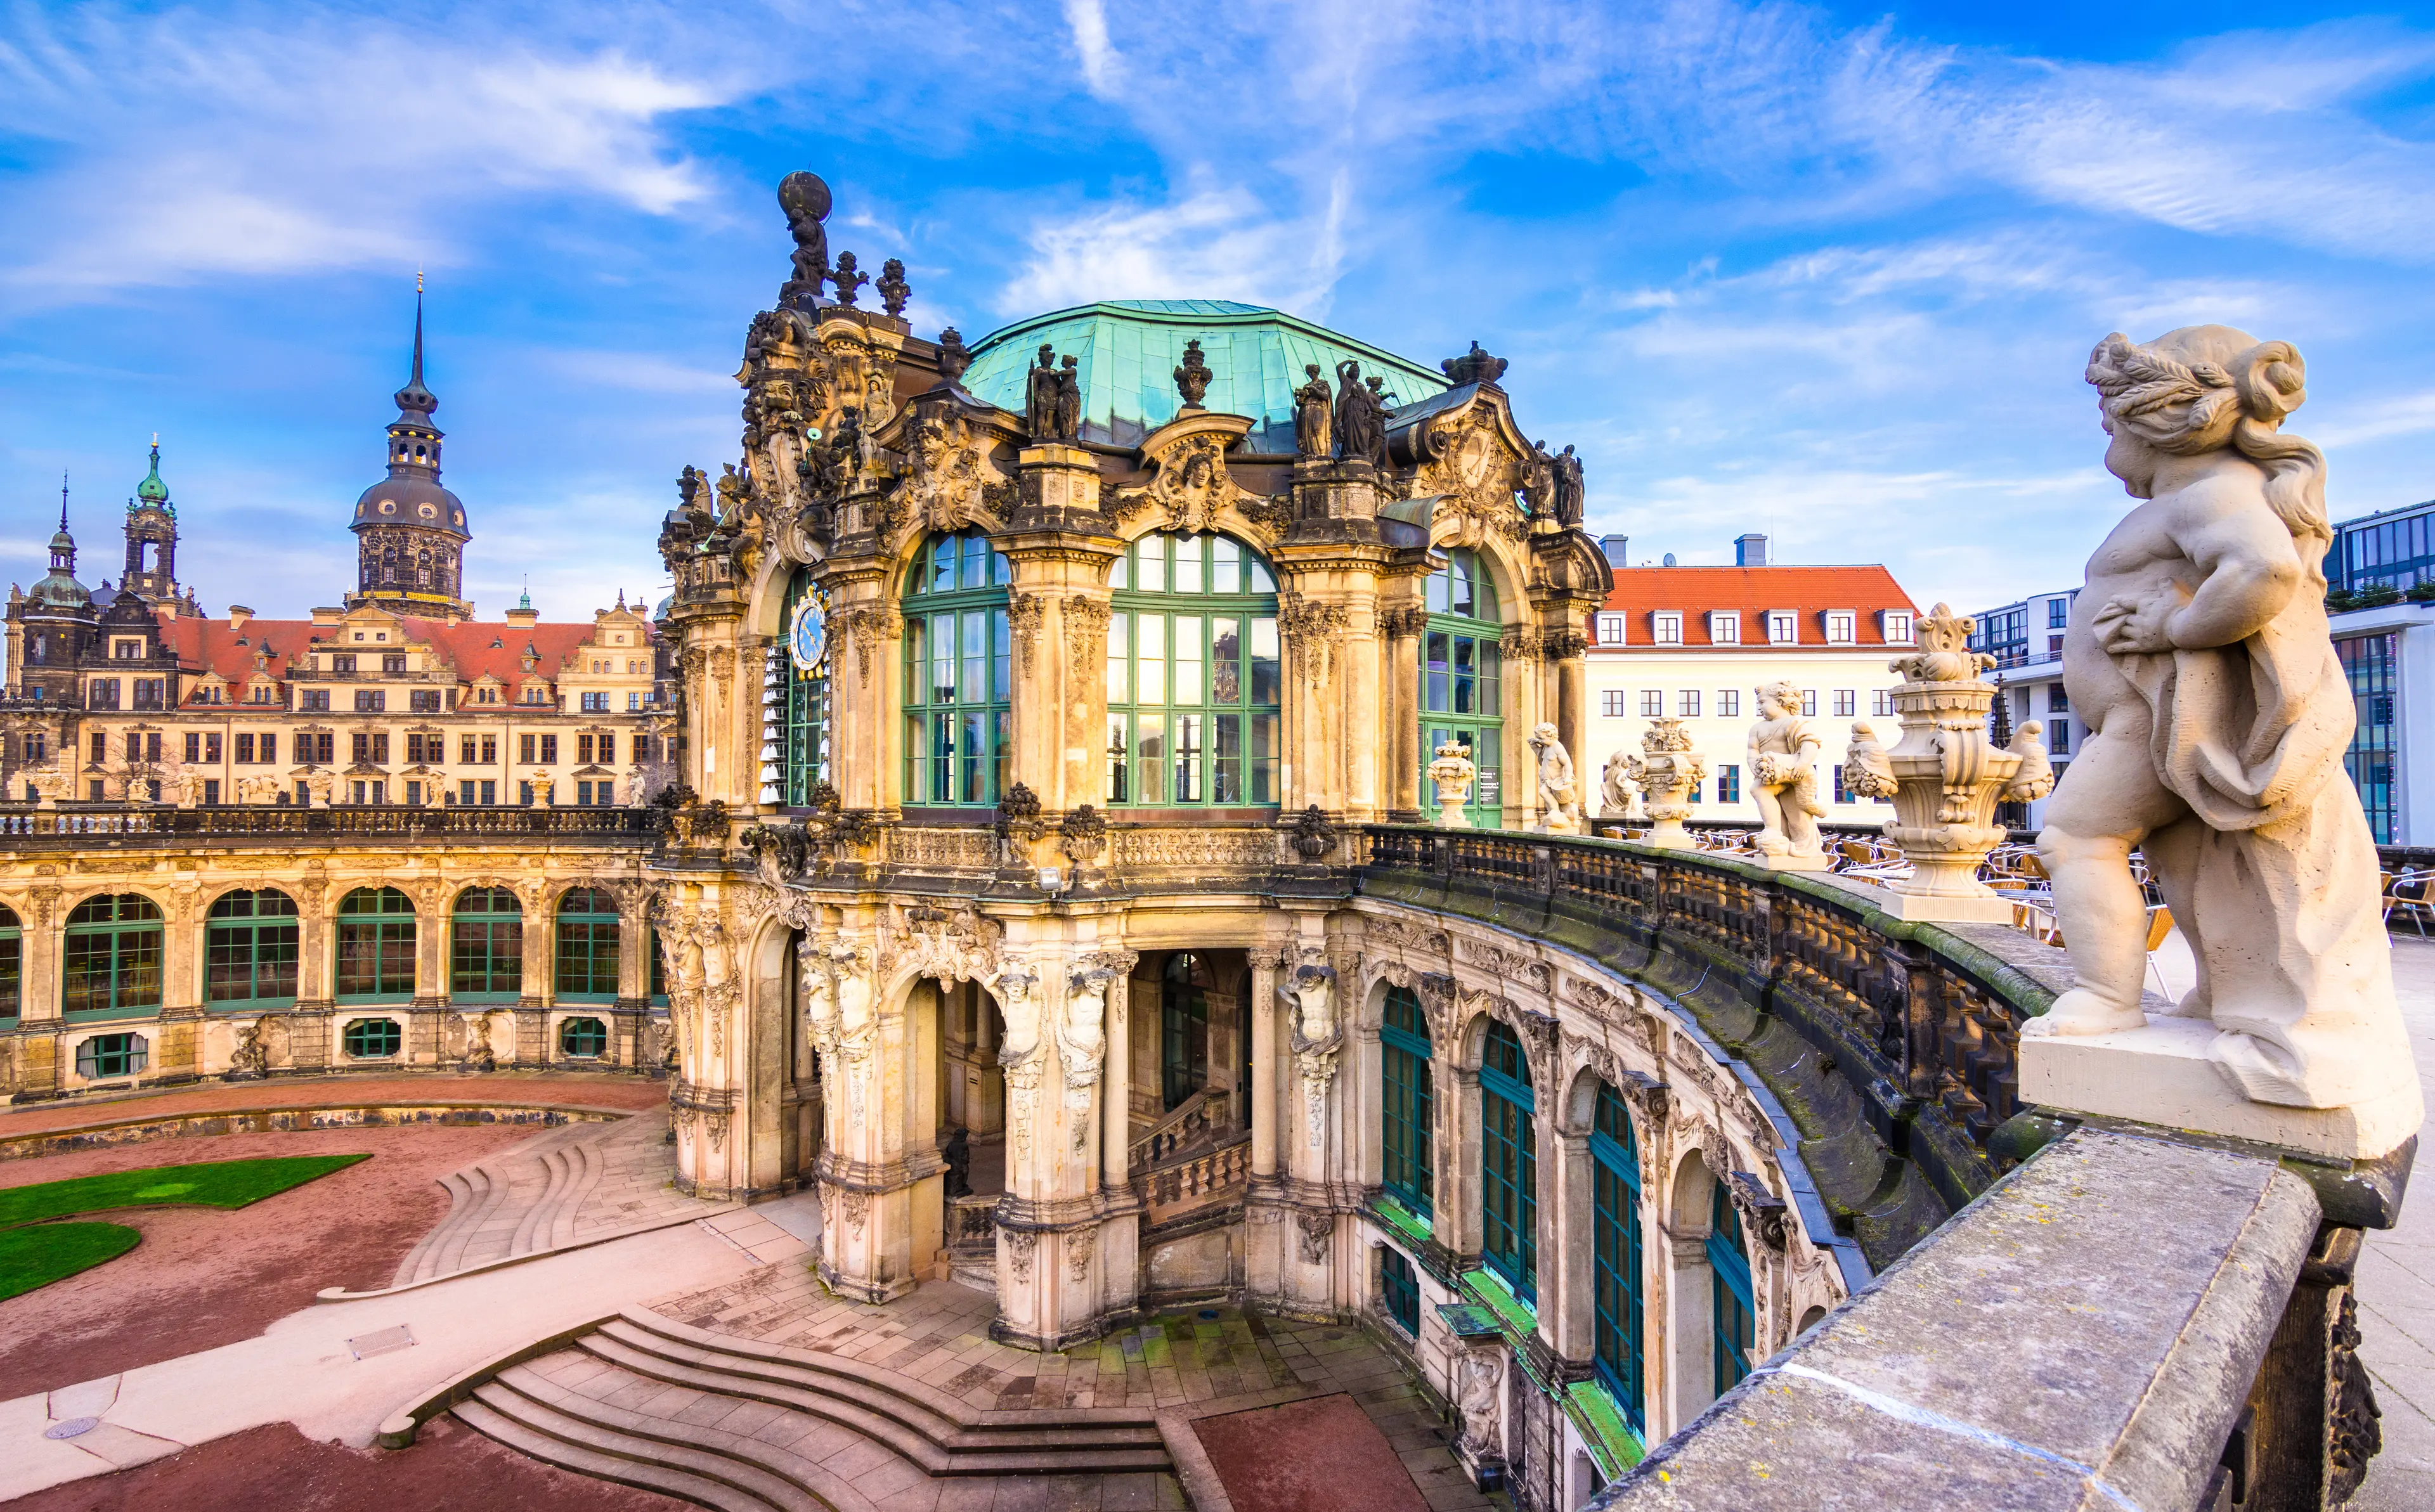 Zwinger palace, art gallery and museum